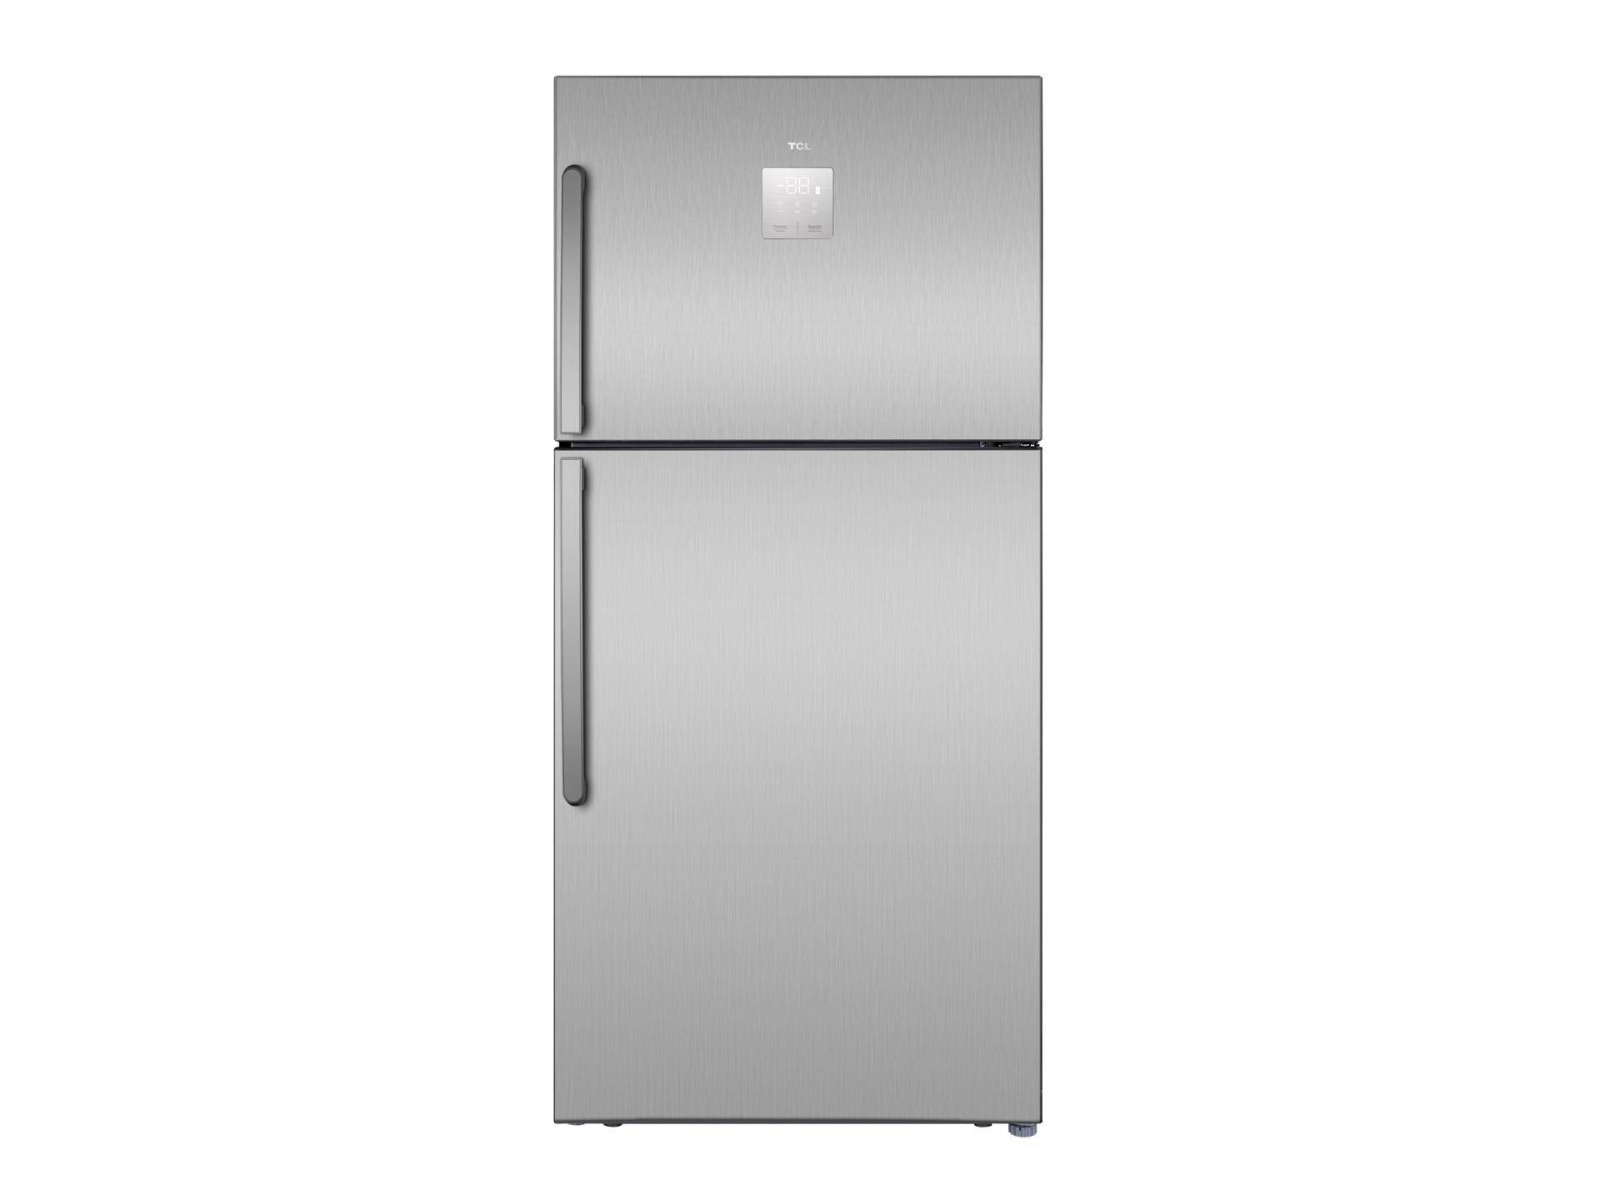 TCL two-door refrigerator, 21.5 feet, capacity 606 litres, silver, TRF-620WEXPU